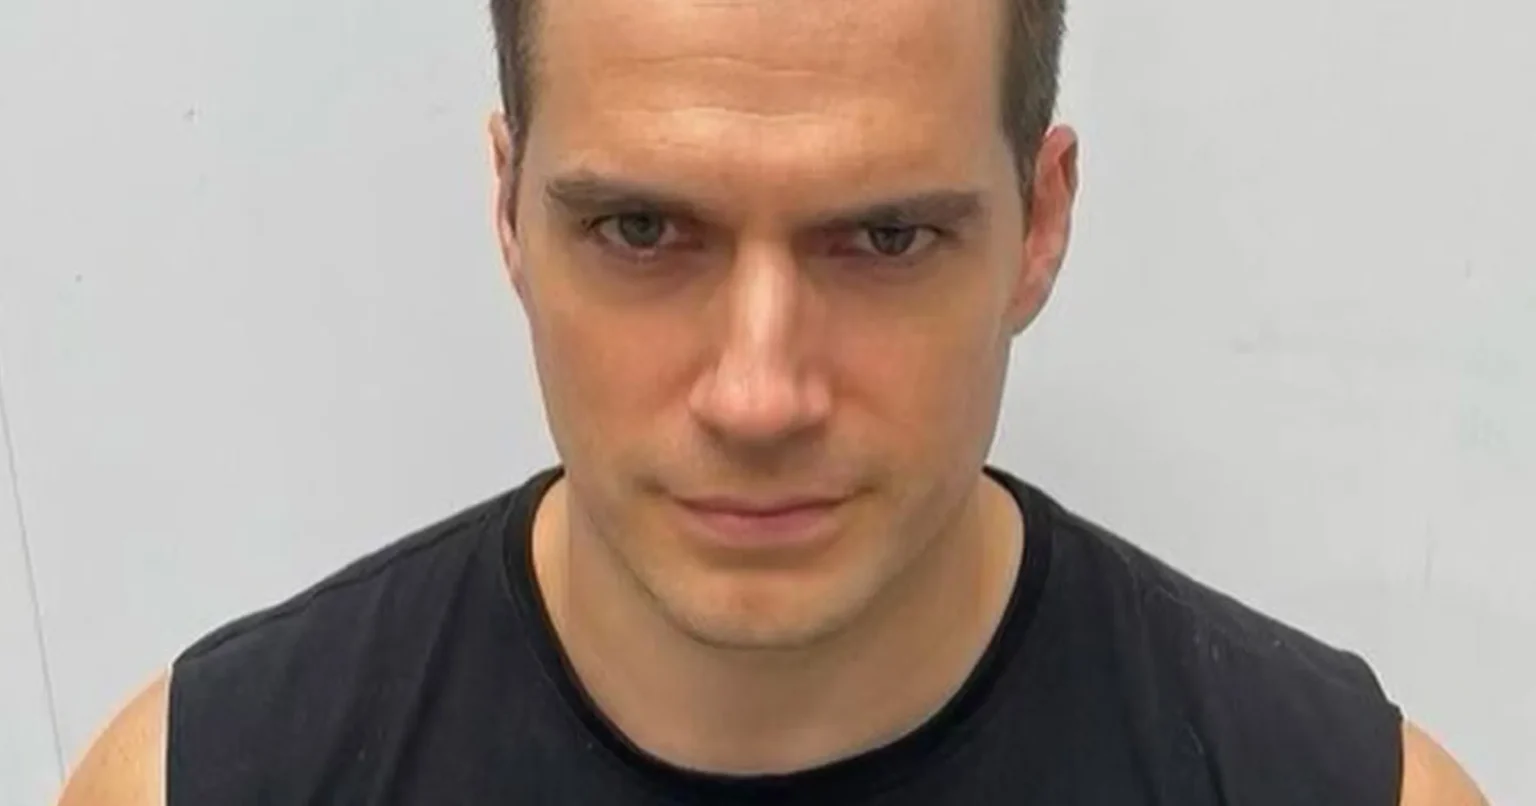 Everyone Henry Cavill looks like with new haircut, from Simon Cowell to Toy Story’s Sid 